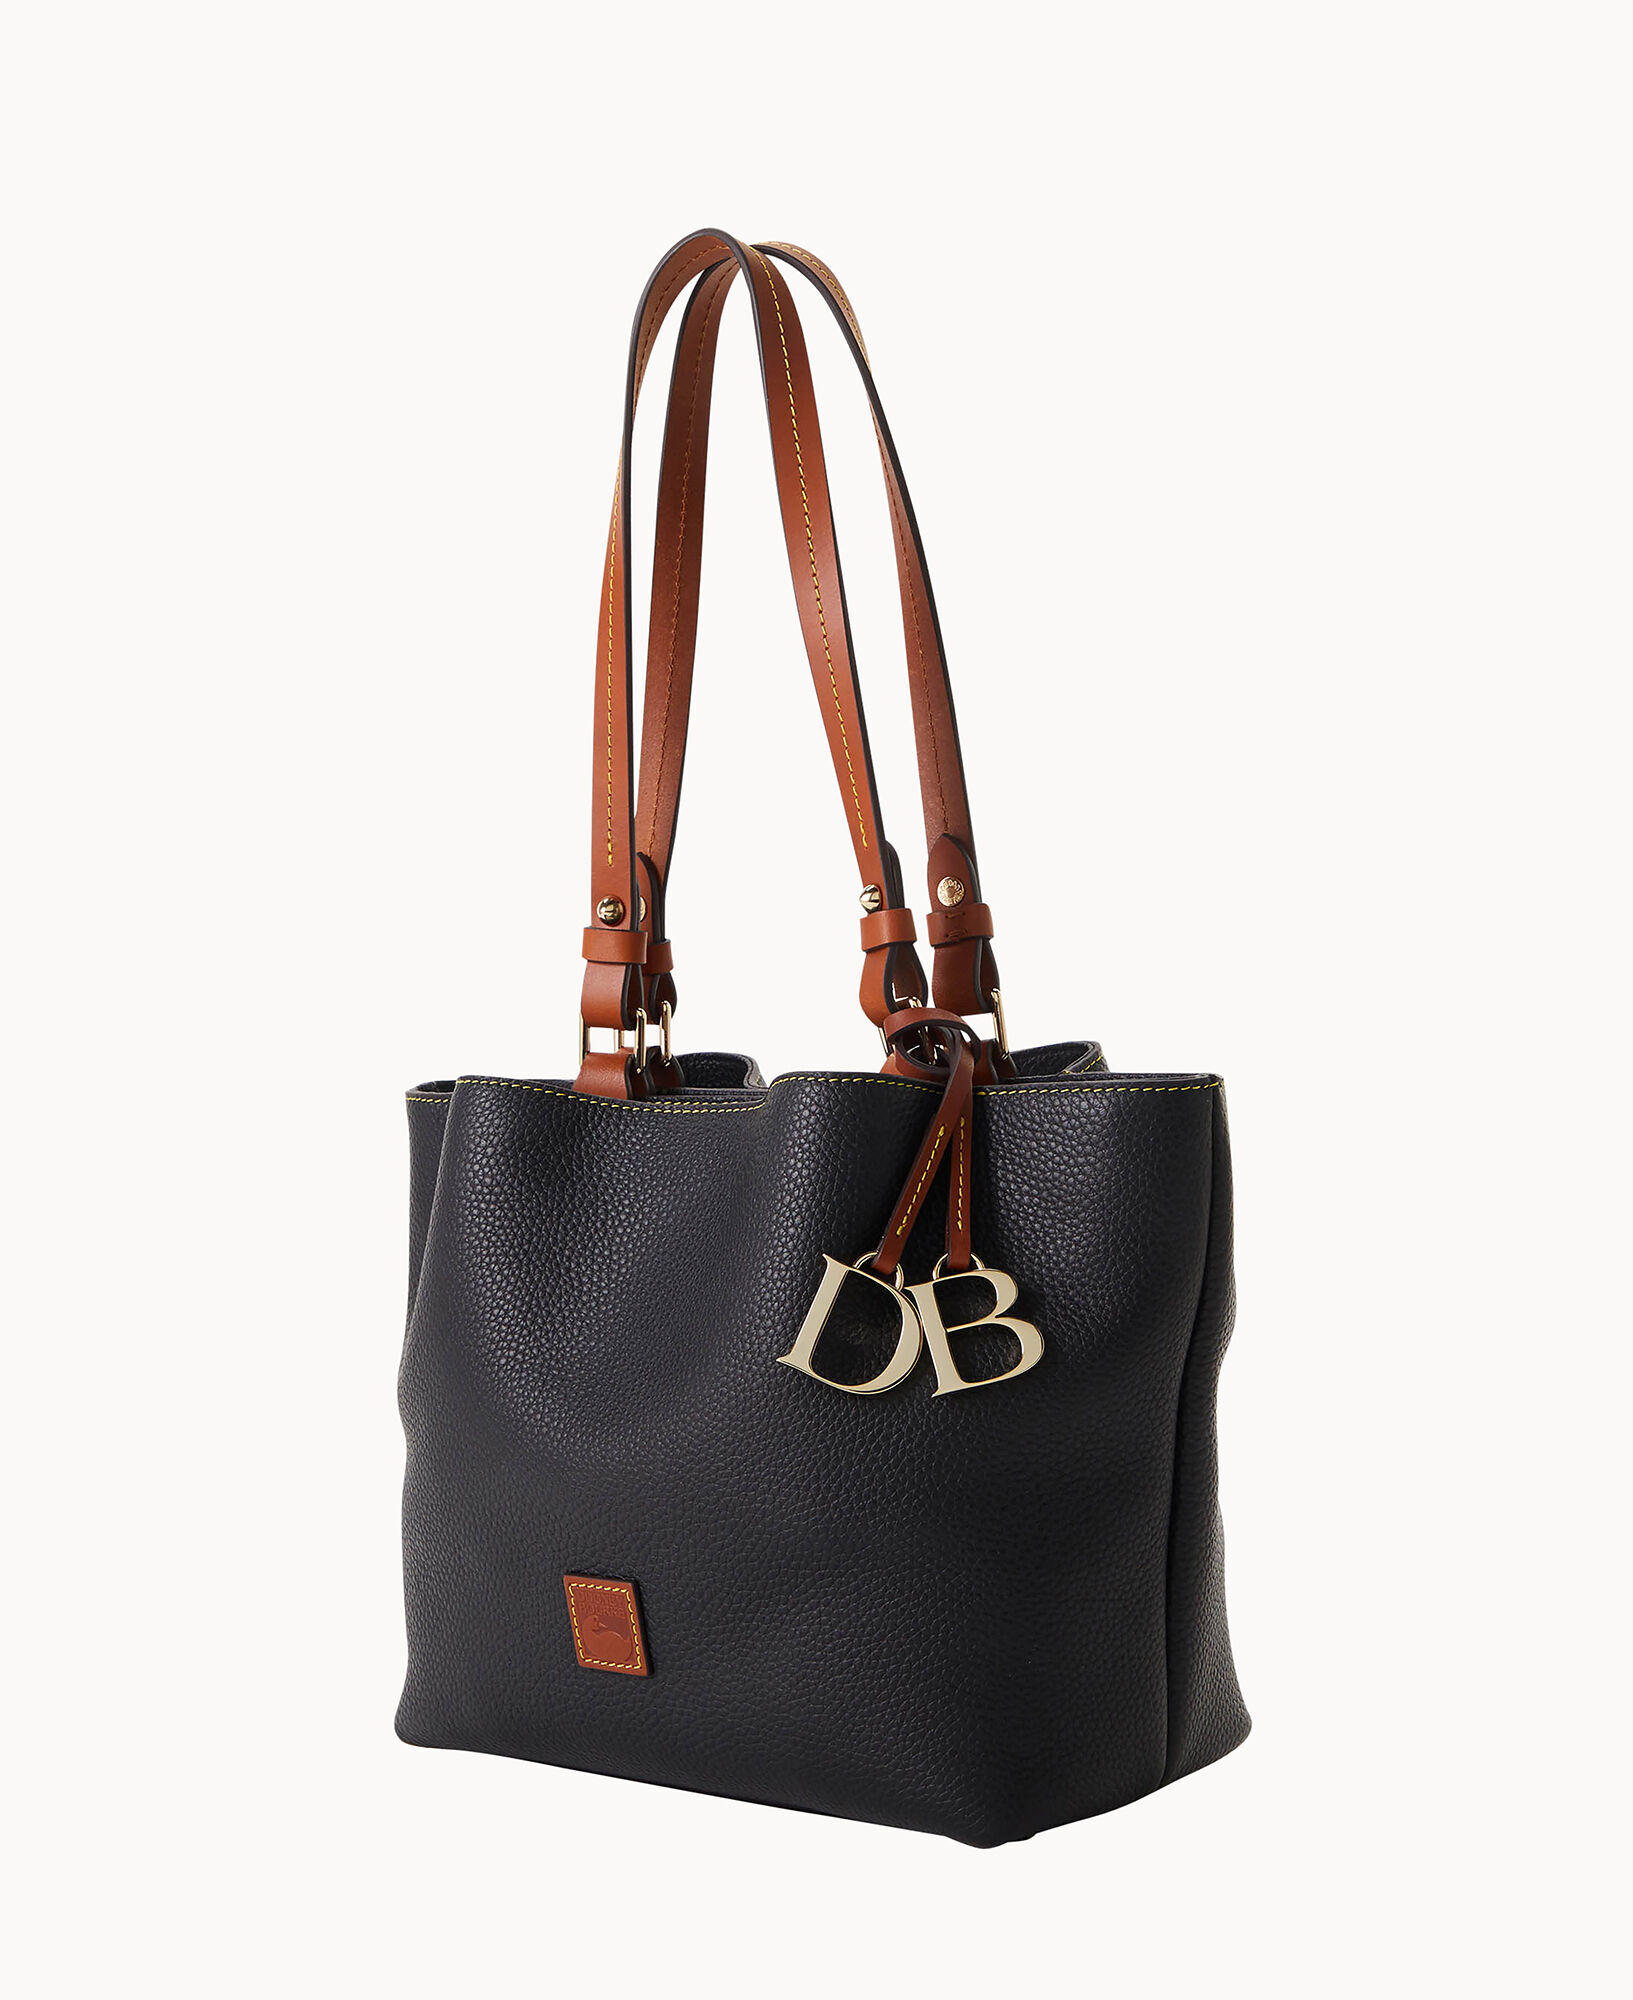 Dooney & Bourke Pebble Leather Small Tote 